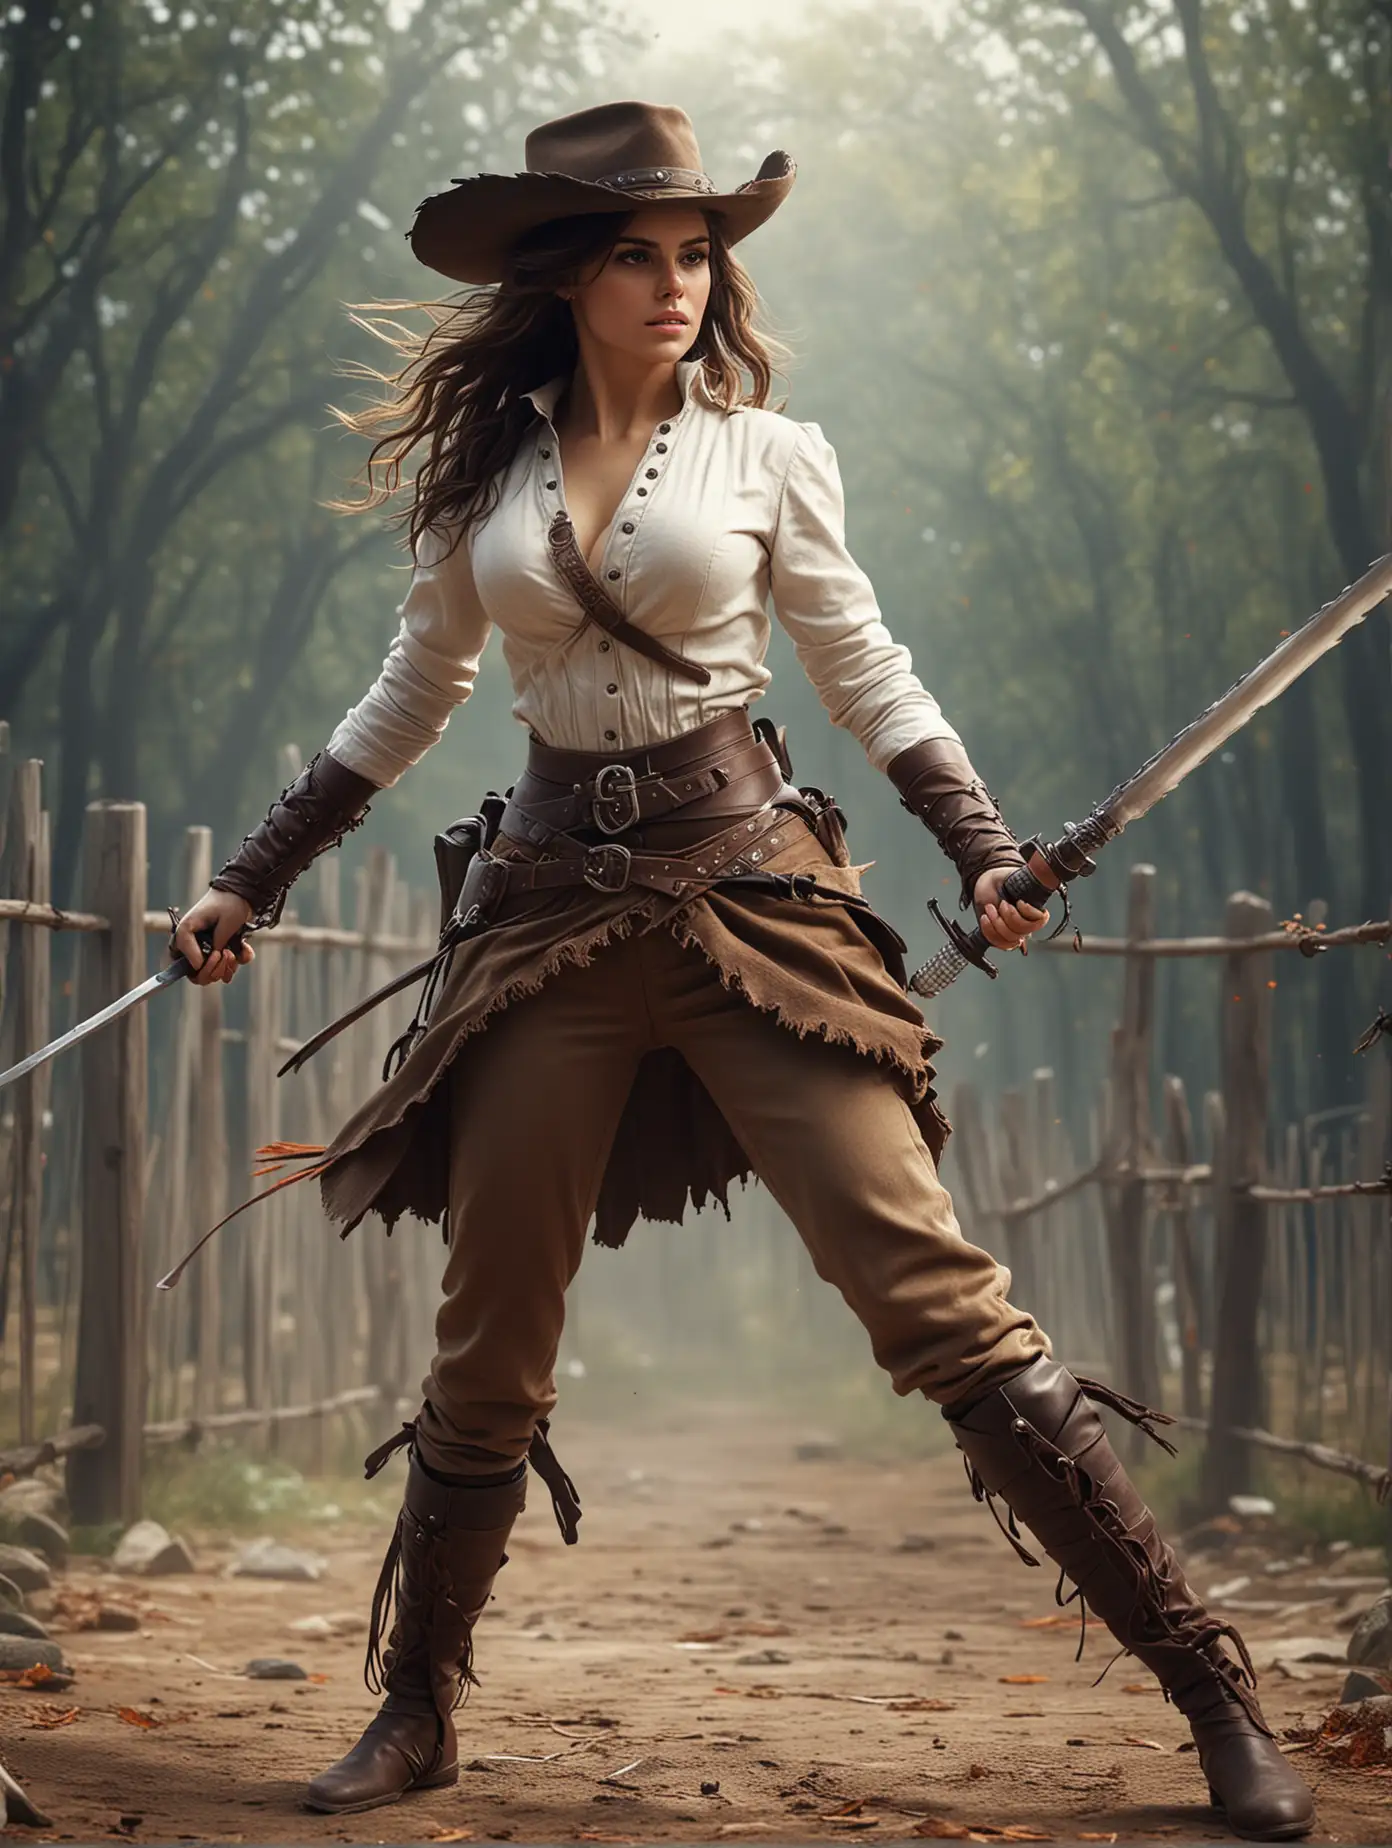 Whimsical, create an image of a beauty european girl, brunette hair, curvy, dynamic battle pose, holding fencing sword, cosplaying as The Lone Ranger character. Fantasy theme, colorful organic shape, moody lightinh, hyper-detailed, ultra HD.